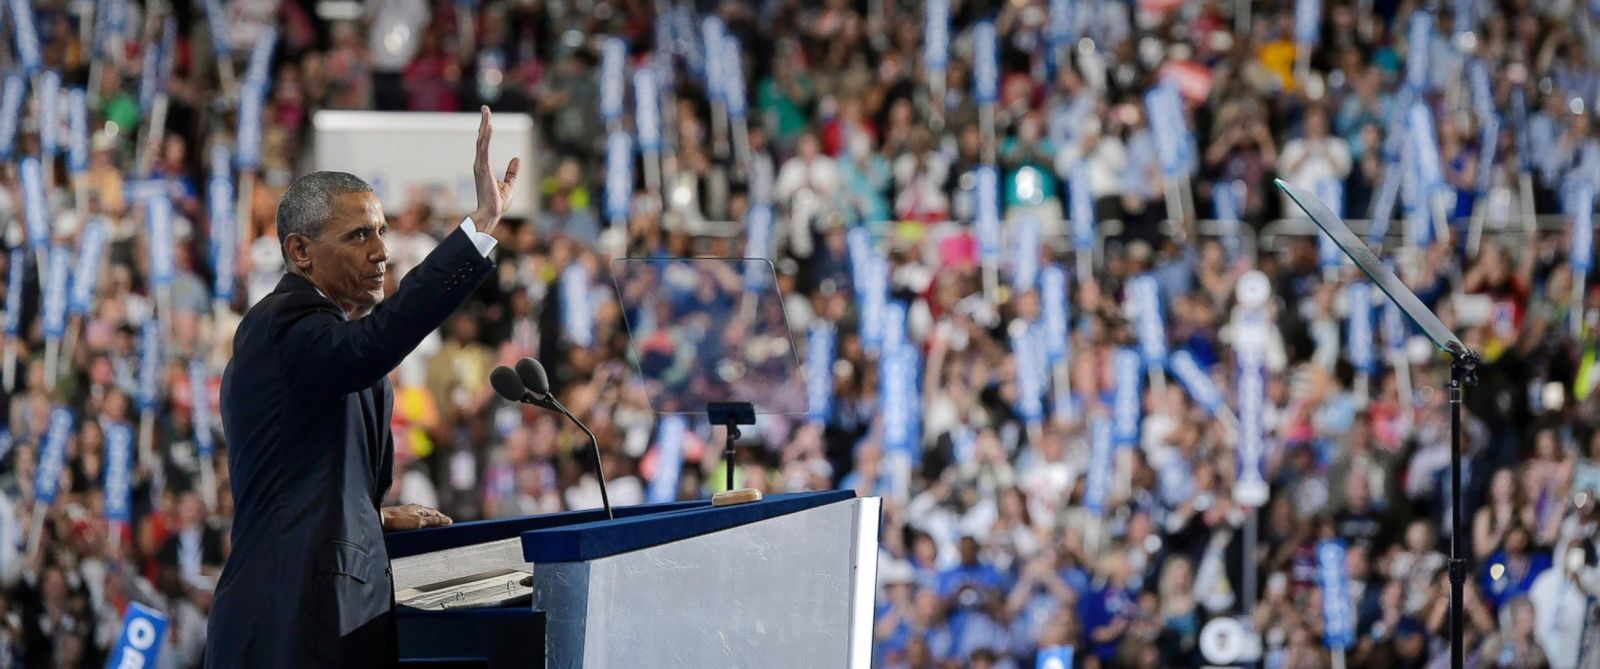 President Obama Tells DNC 'America is Already Great' and 'We Don't Look to Be Ruled'